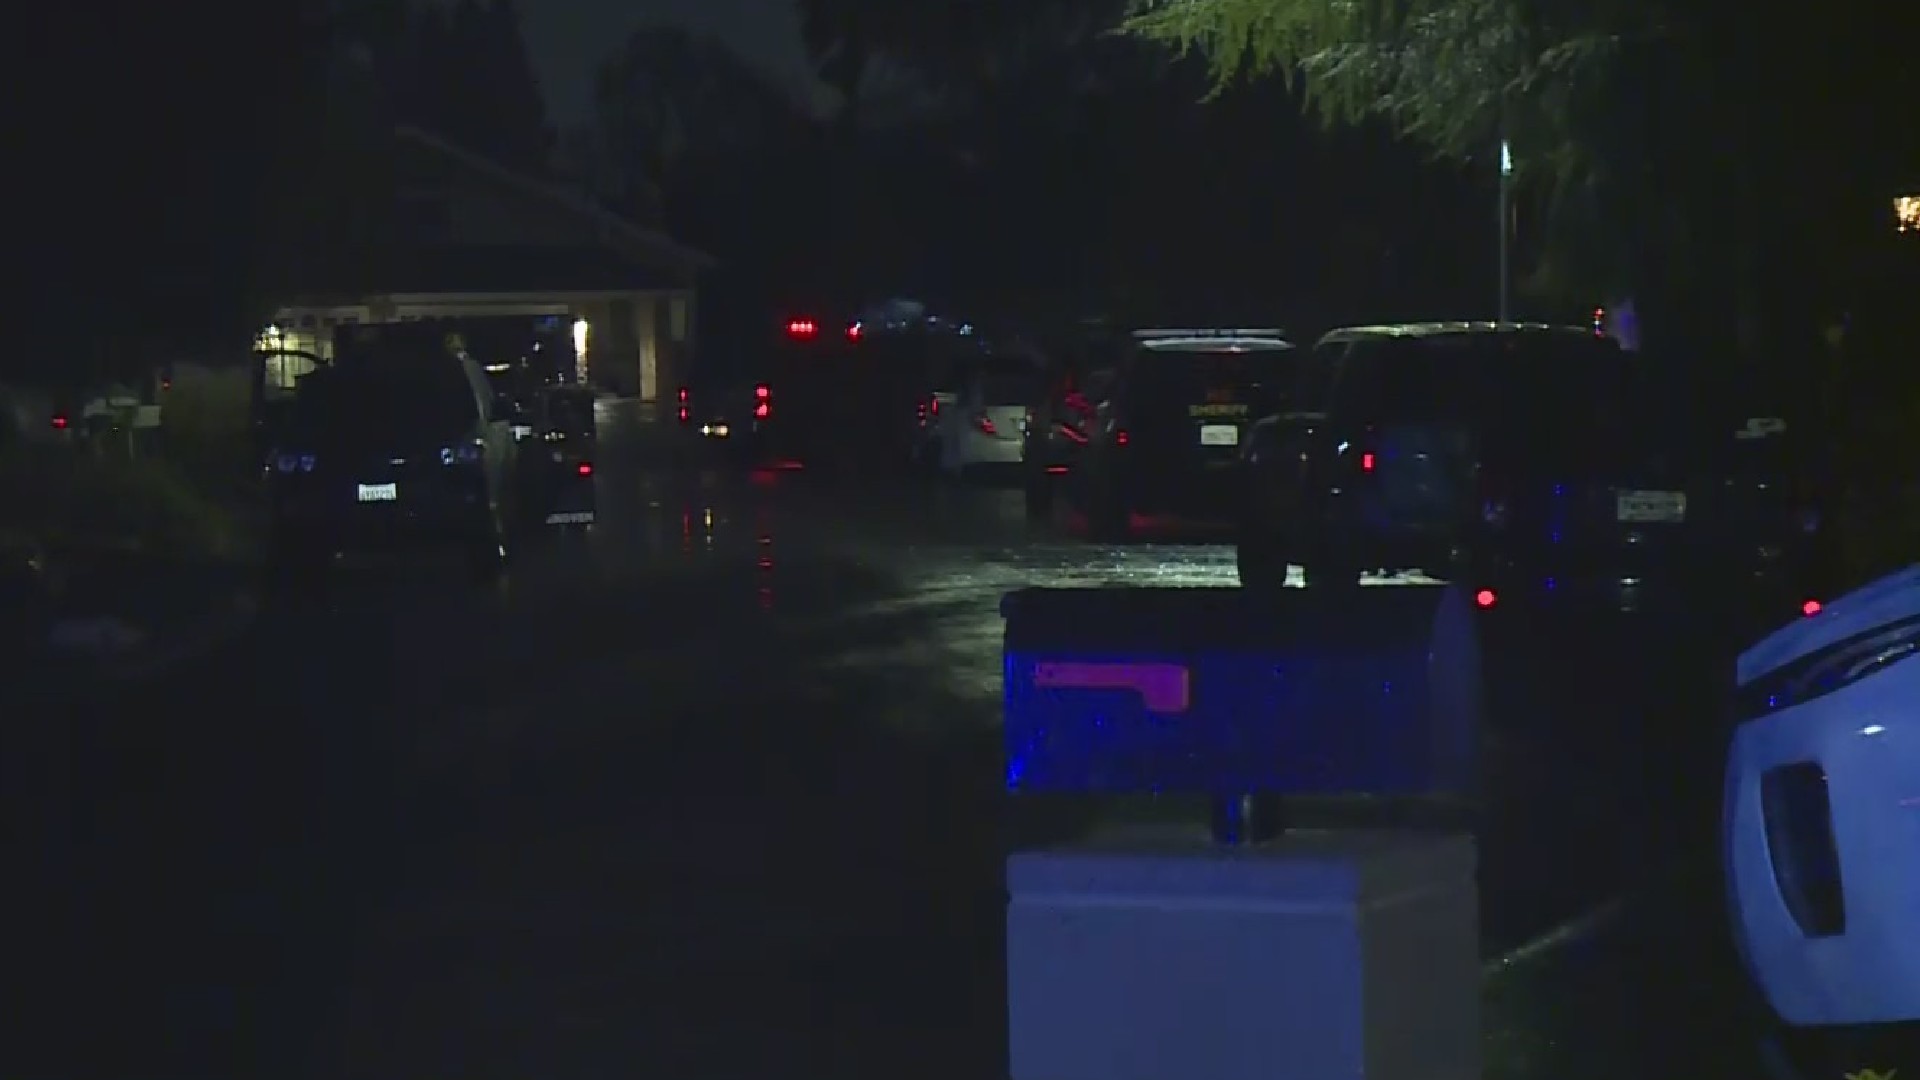 Police Dealing With Possible Barricaded Suspect In Rancho Cordova Home